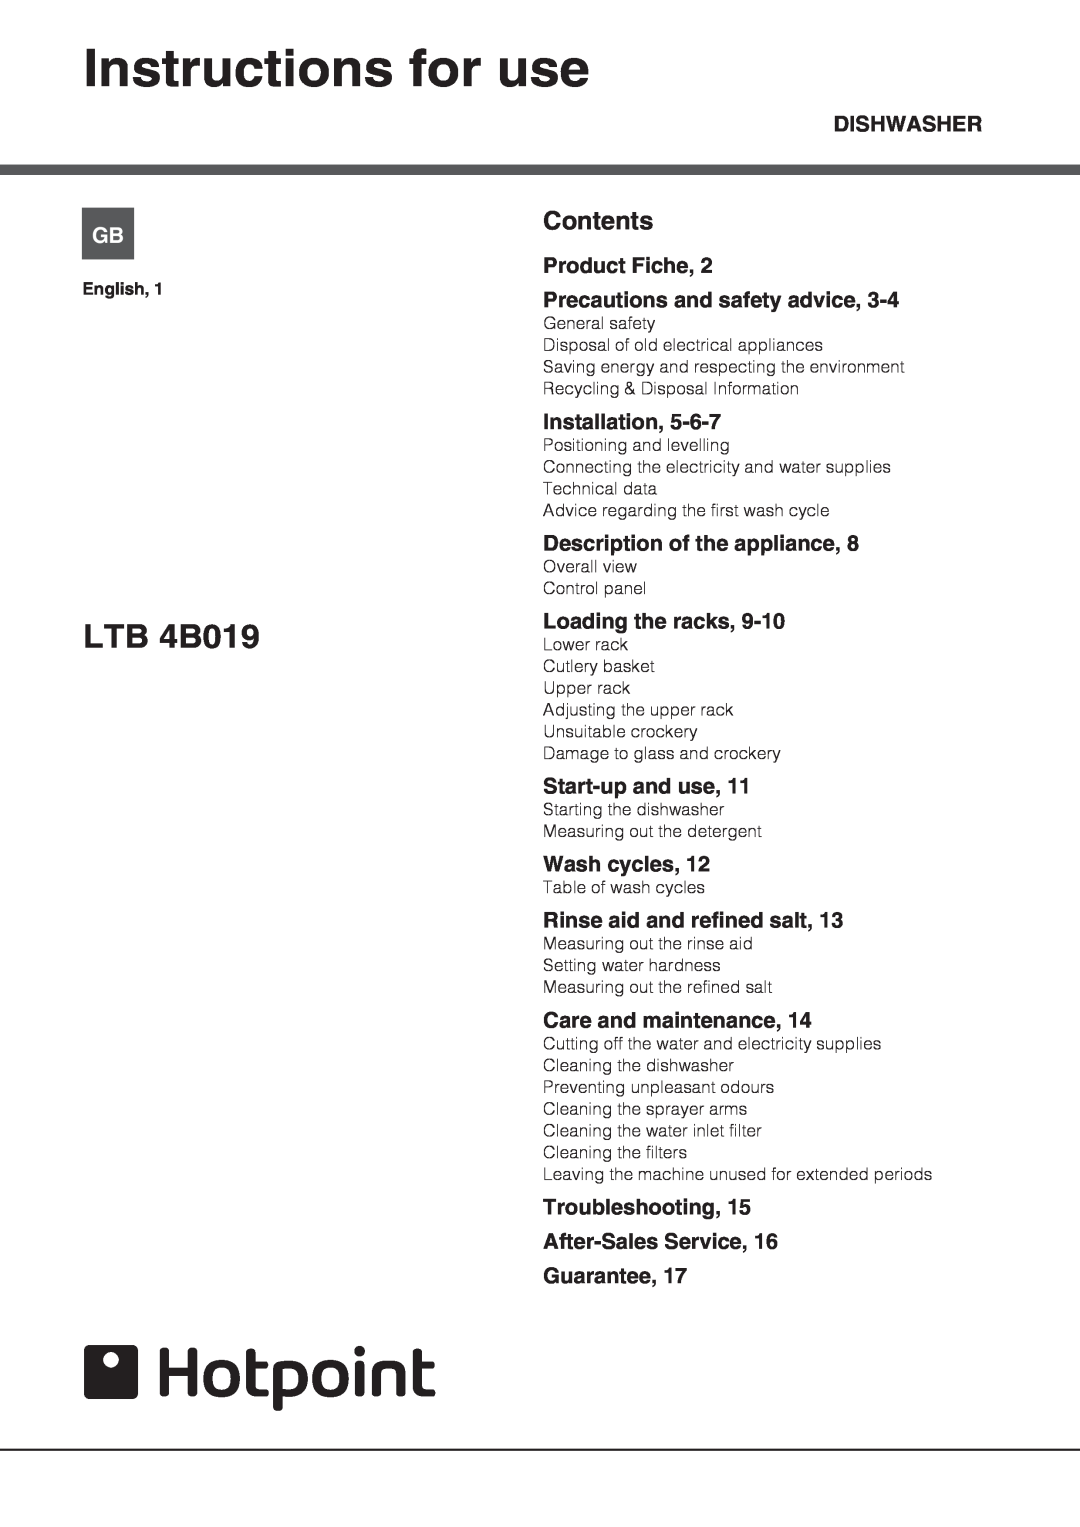 Hotpoint LTB 4B019 manual Instructions for use, Contents 